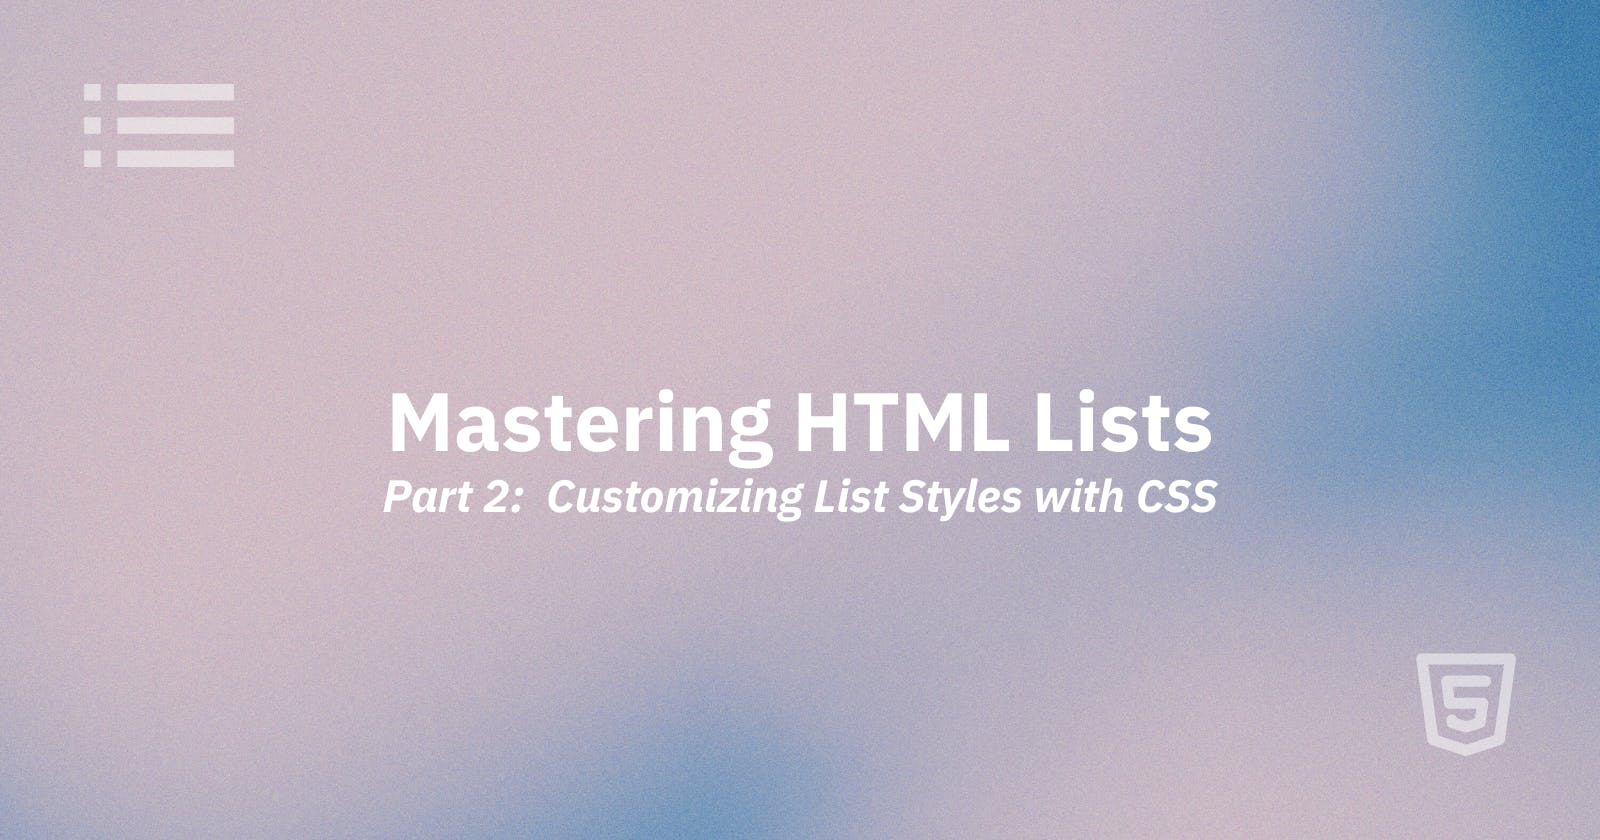 Customizing List Styles with CSS: Dress Your Lists to Impress!